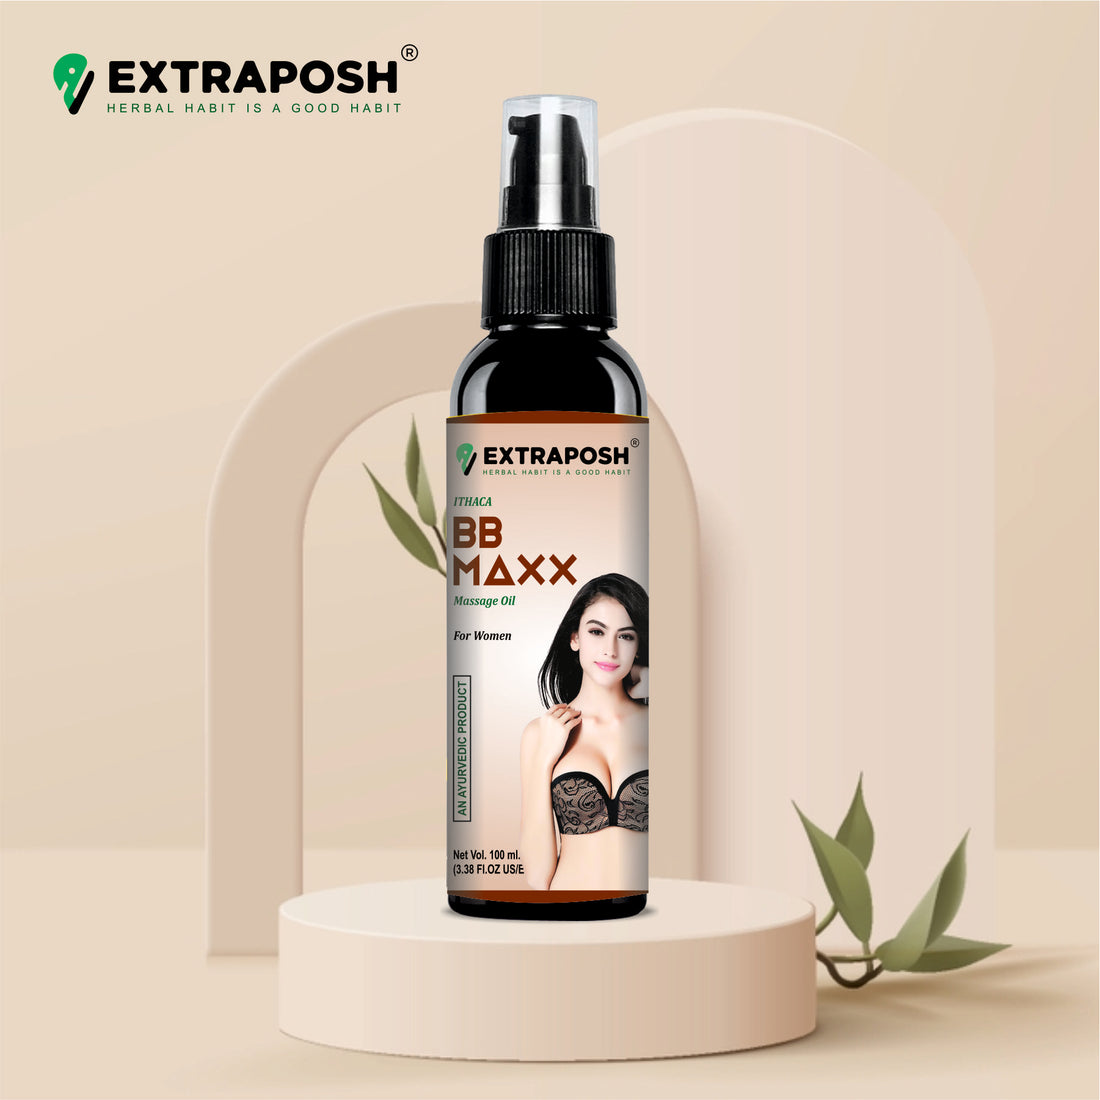 Benefits Of Breast Enlargement Oil And How To Use It Properly